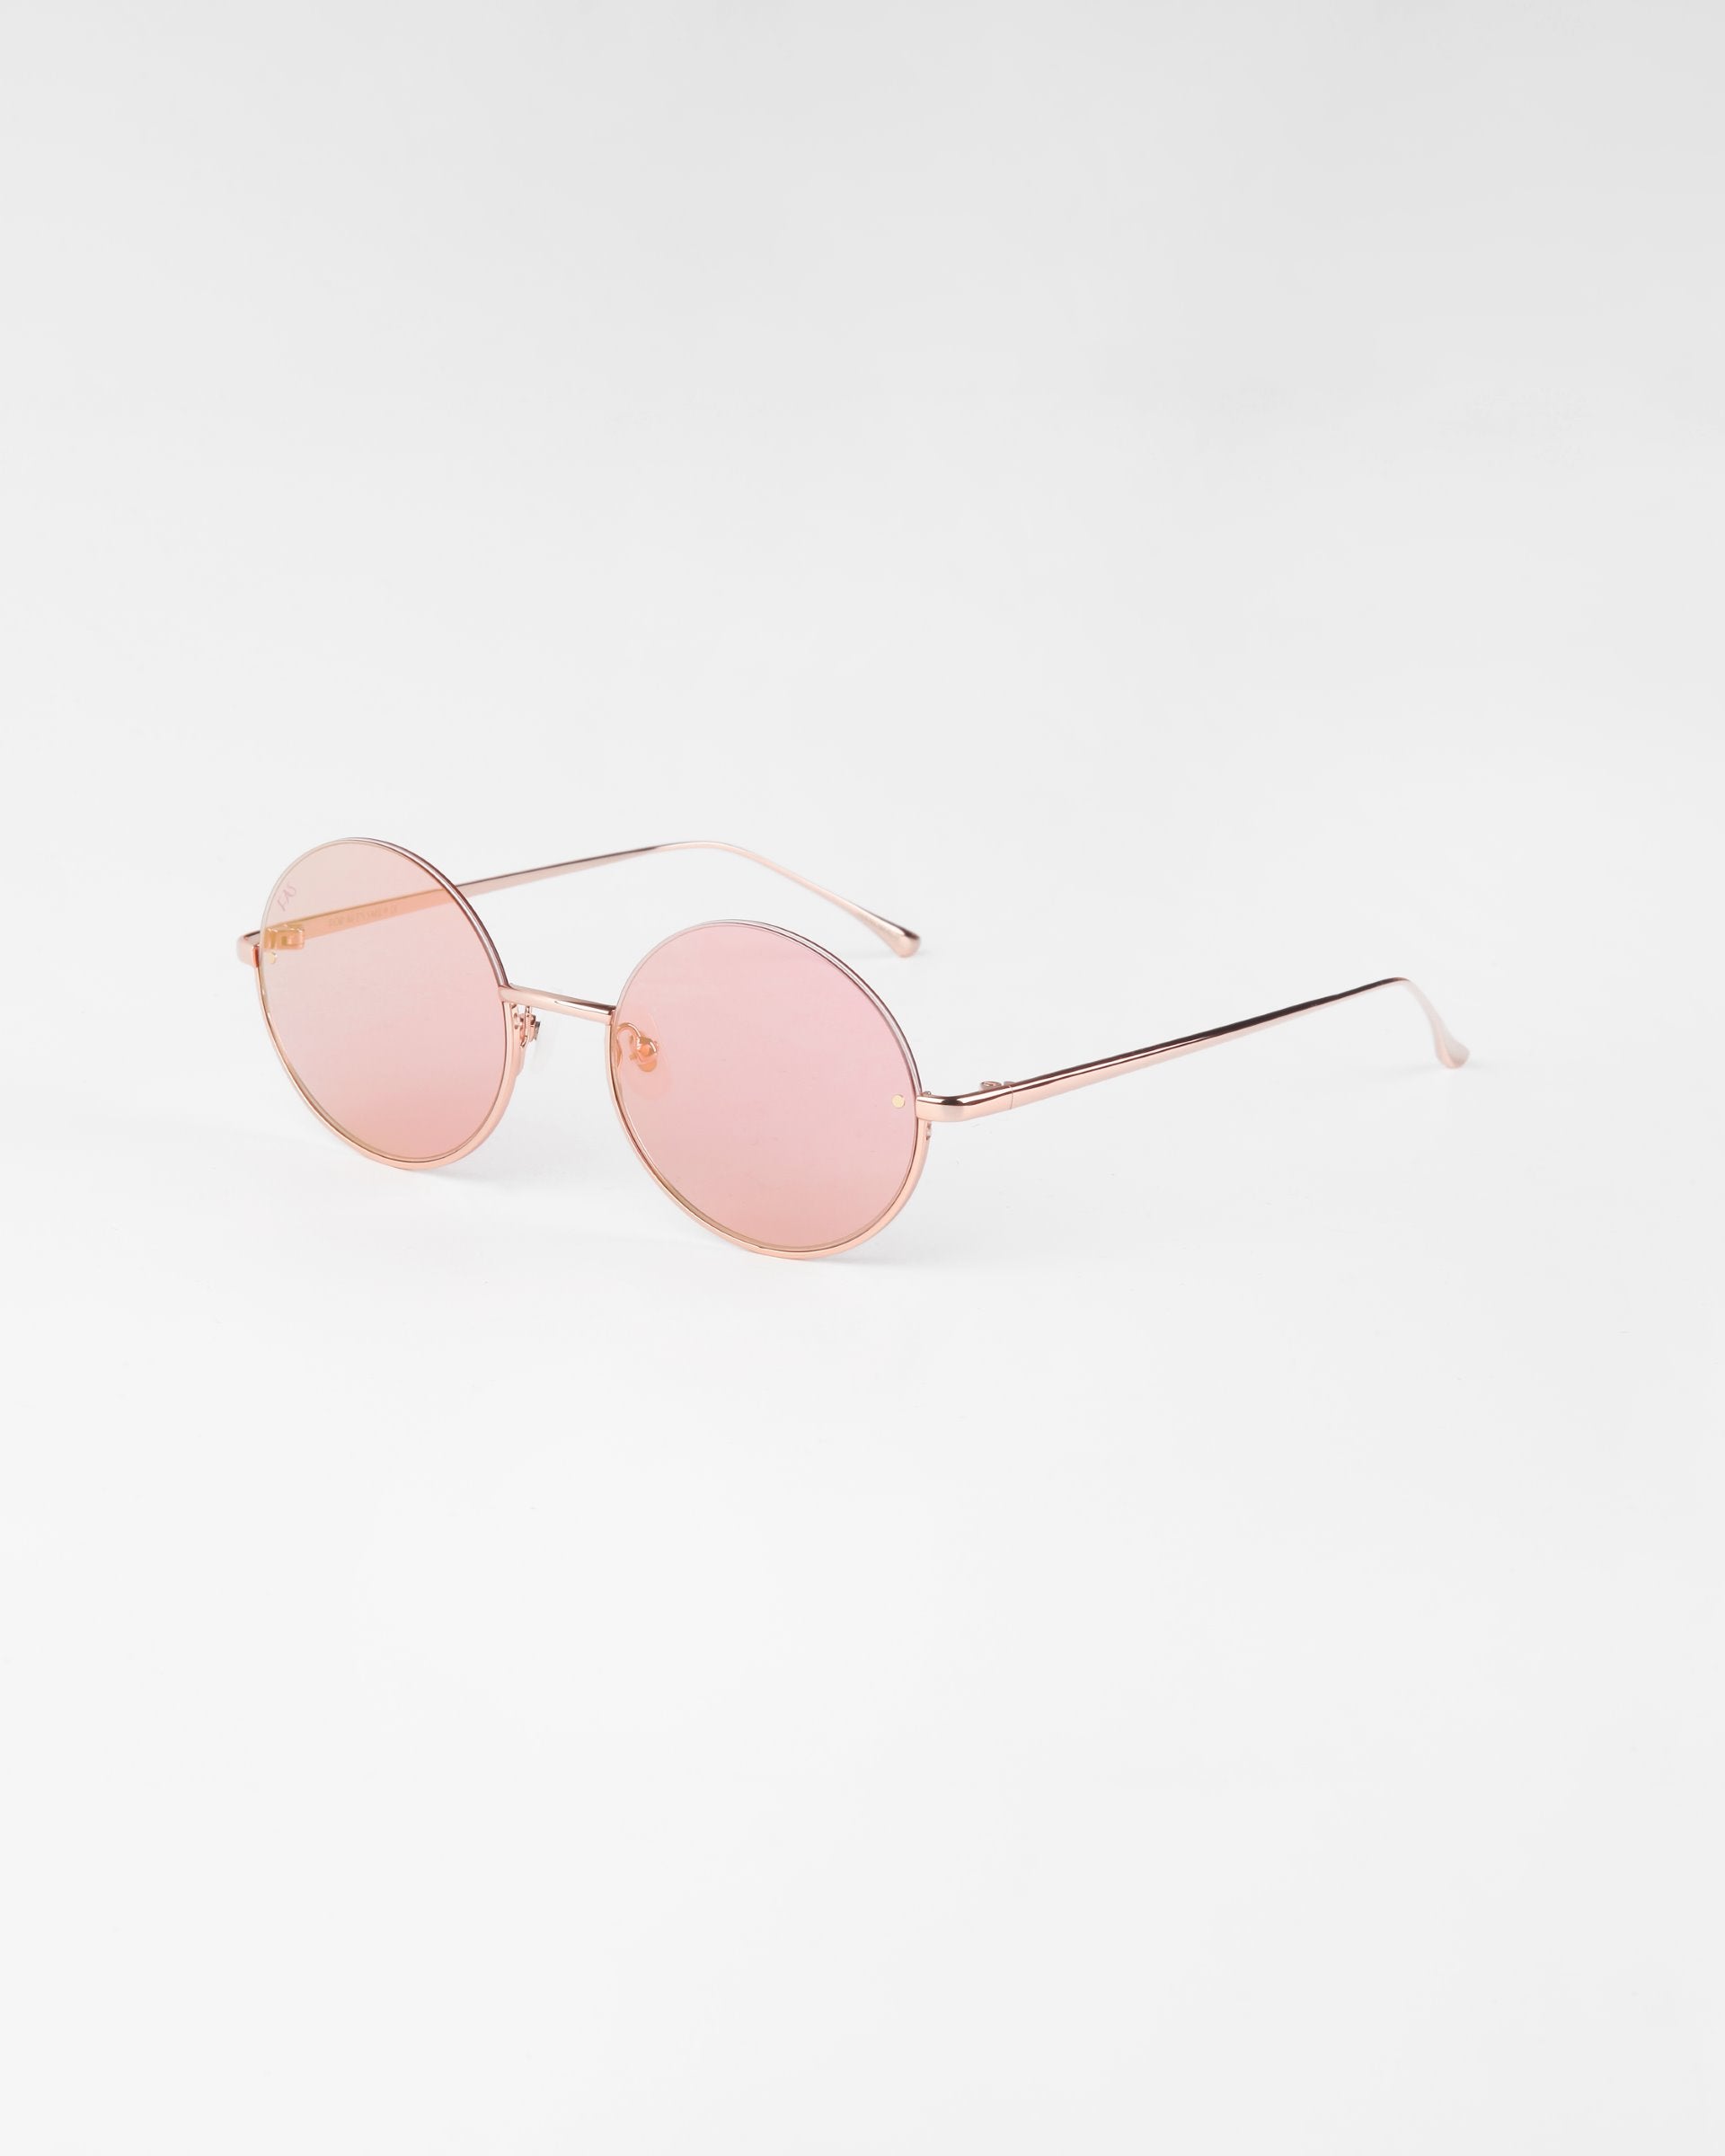 A pair of Skyline by For Art&#39;s Sake® round, pink-tinted sunglasses with slim, 18-karat gold-plated frames and temples. The minimalistic design features thin nose pads and lightweight construction with nylon lenses, all set against a plain white background.